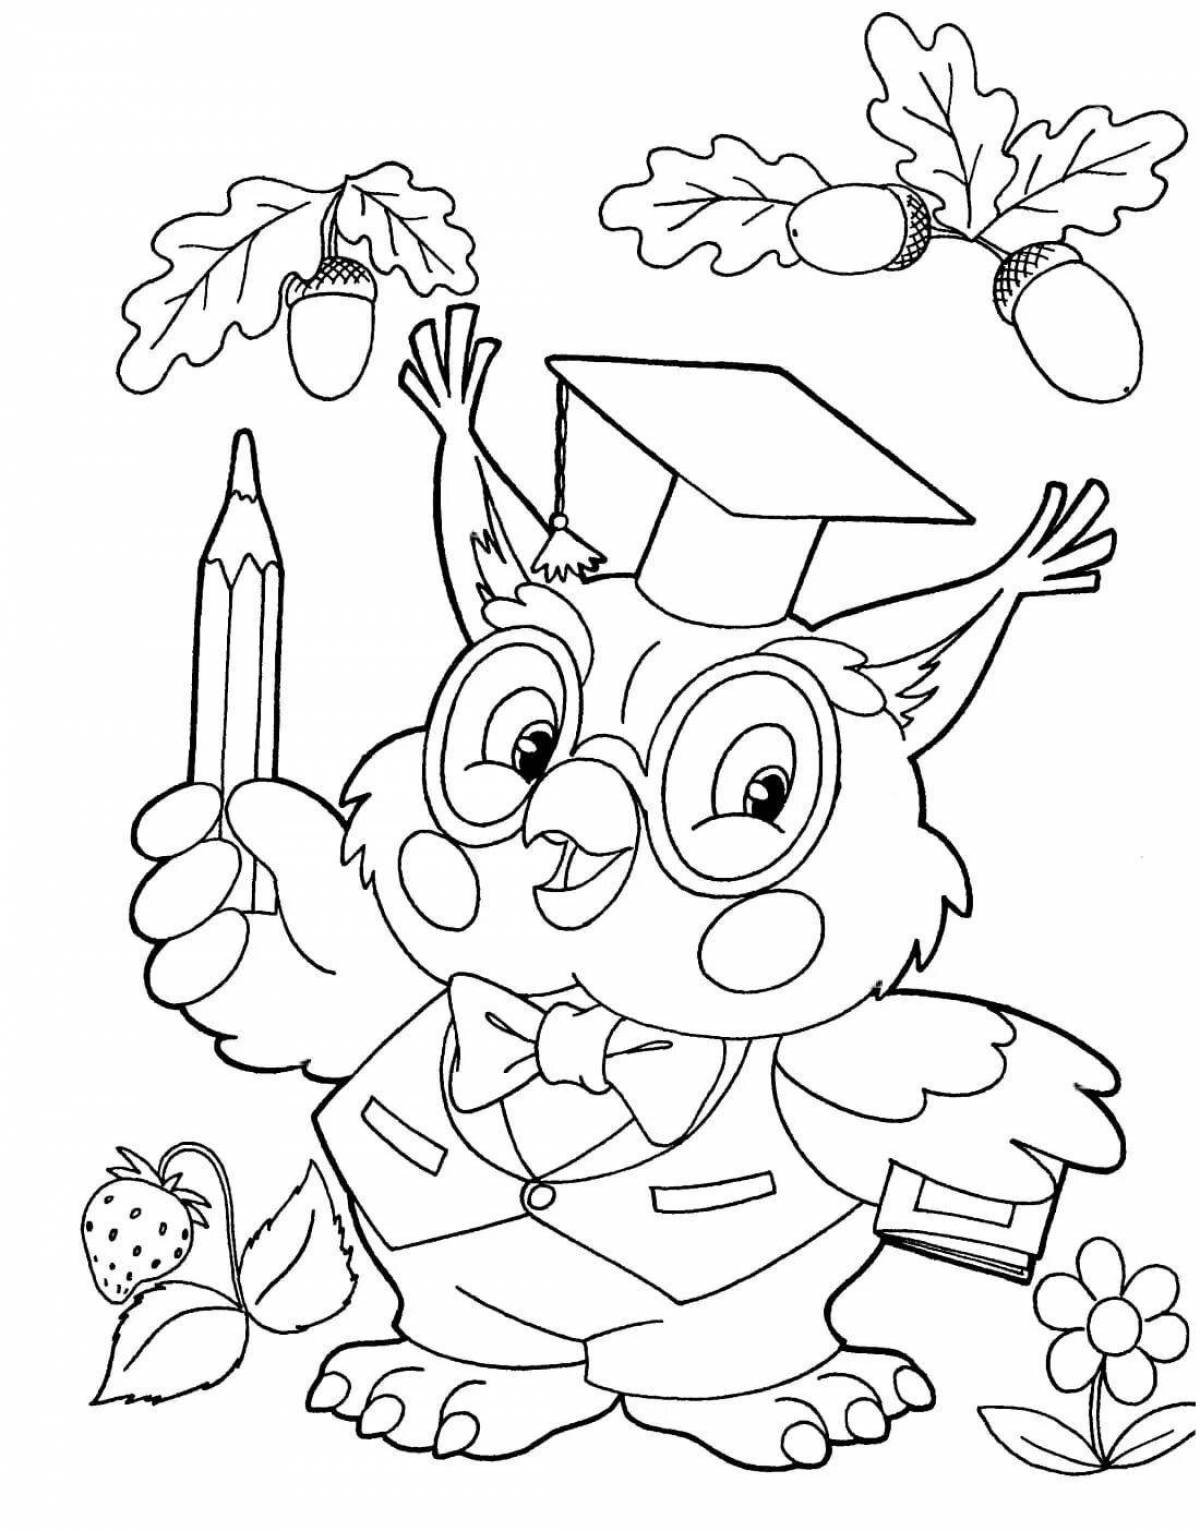 Gorgeous scientific owl coloring page